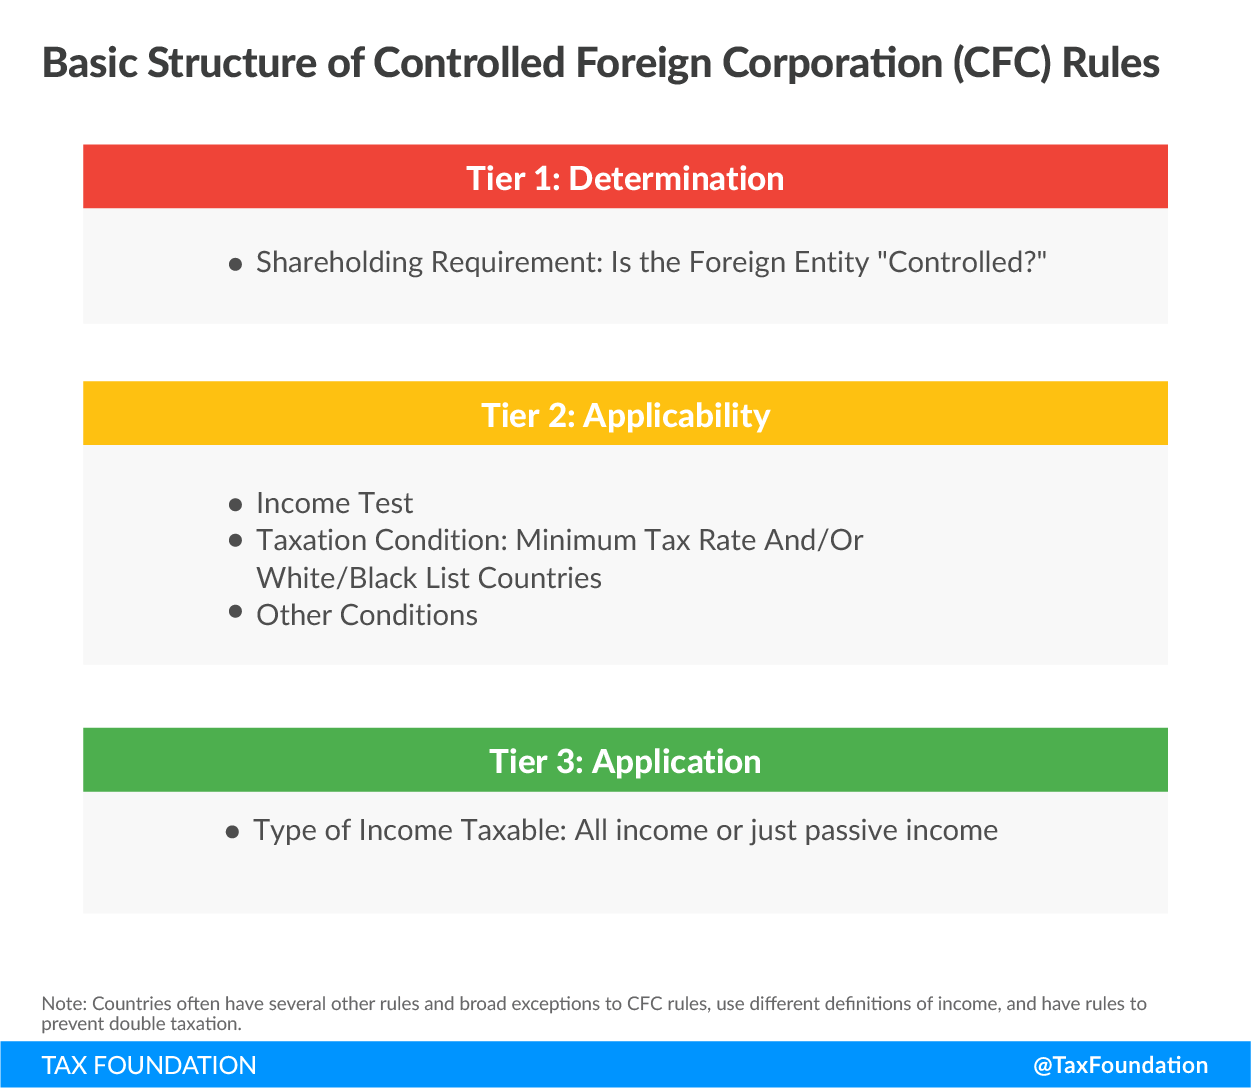 Basic-Structure-of-controlled-foreign-corporation-CFC-rules